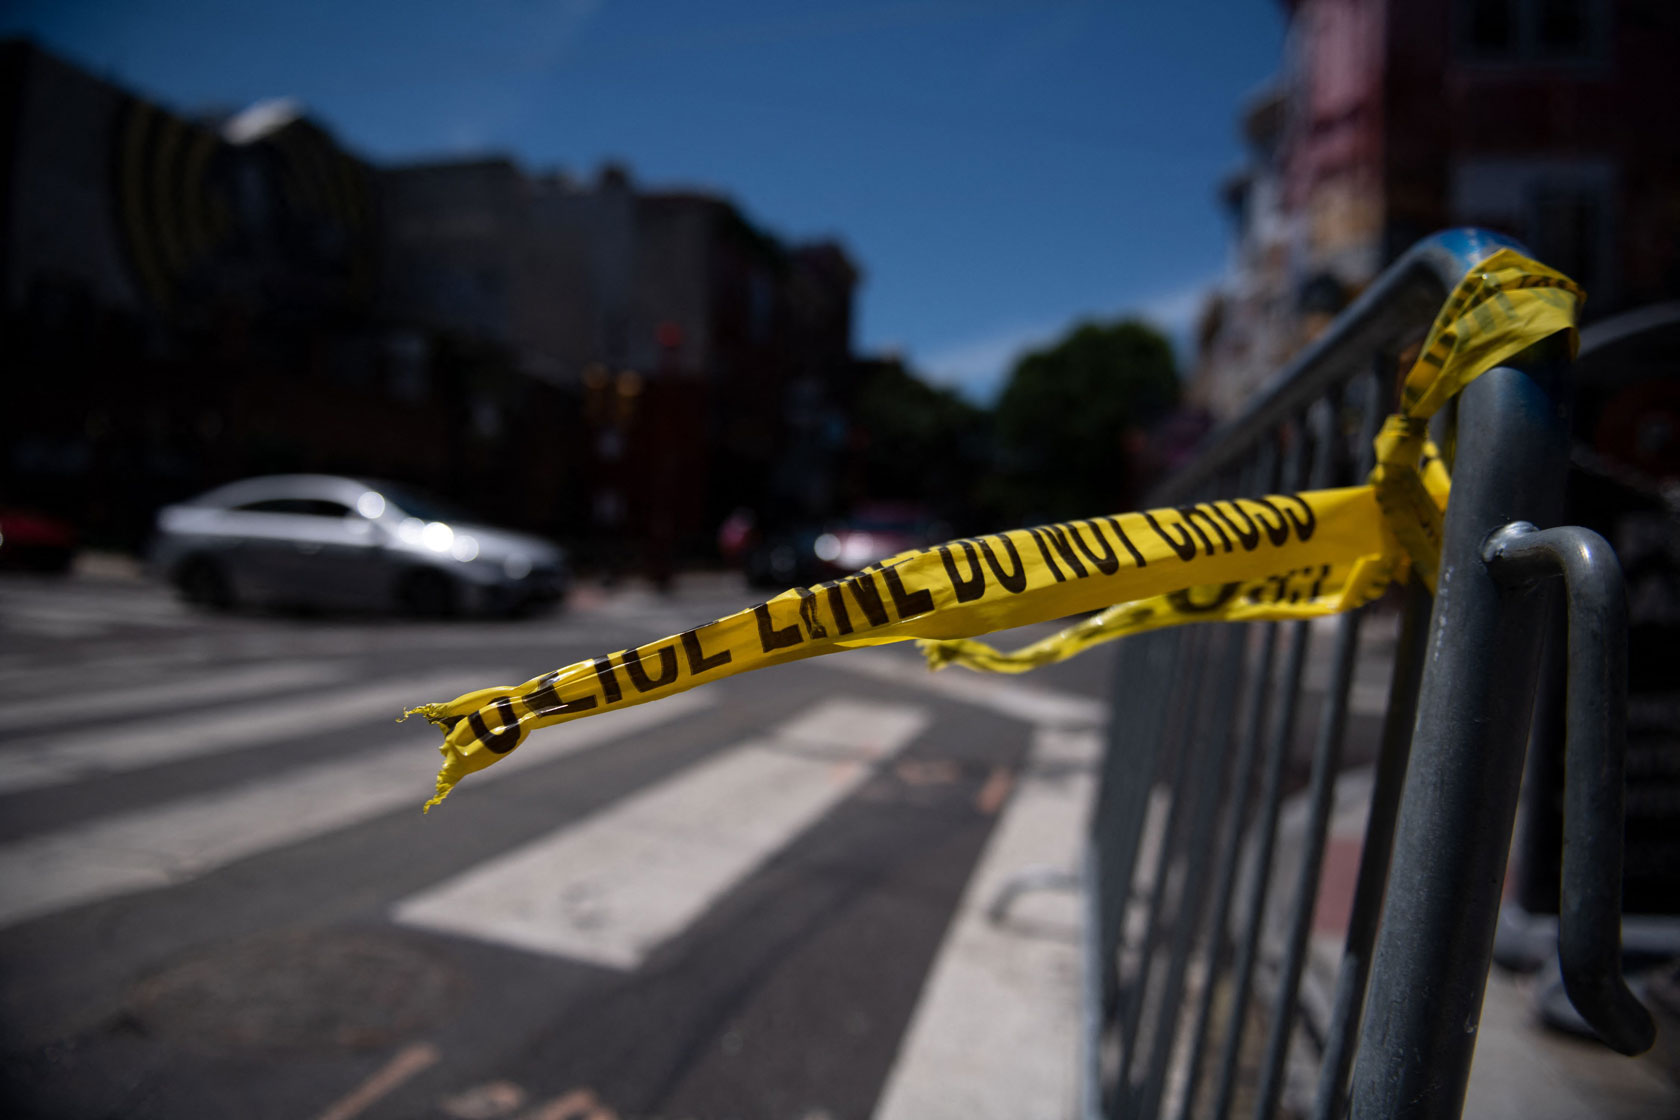 Police tape hangs from a barricade at the corner of 3rd and South Street in Philadelphia.